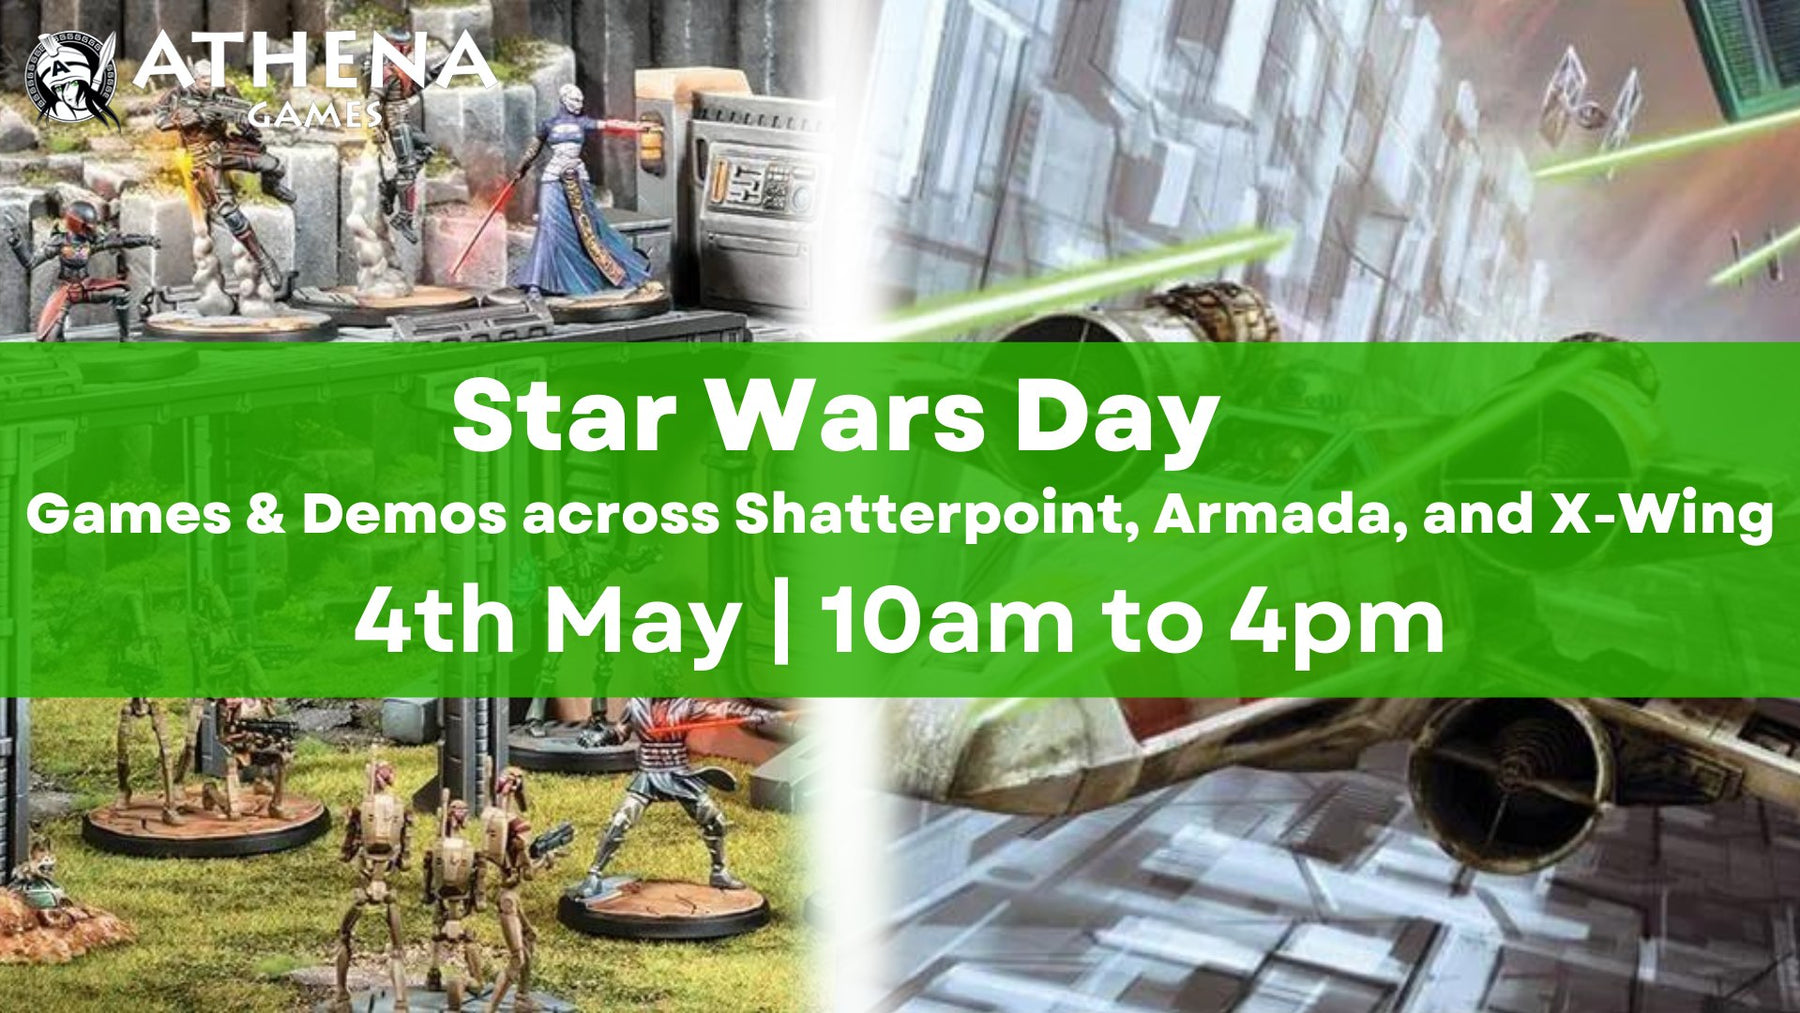 Gear Up for Star Wars Day with Galactic Role-Play Games